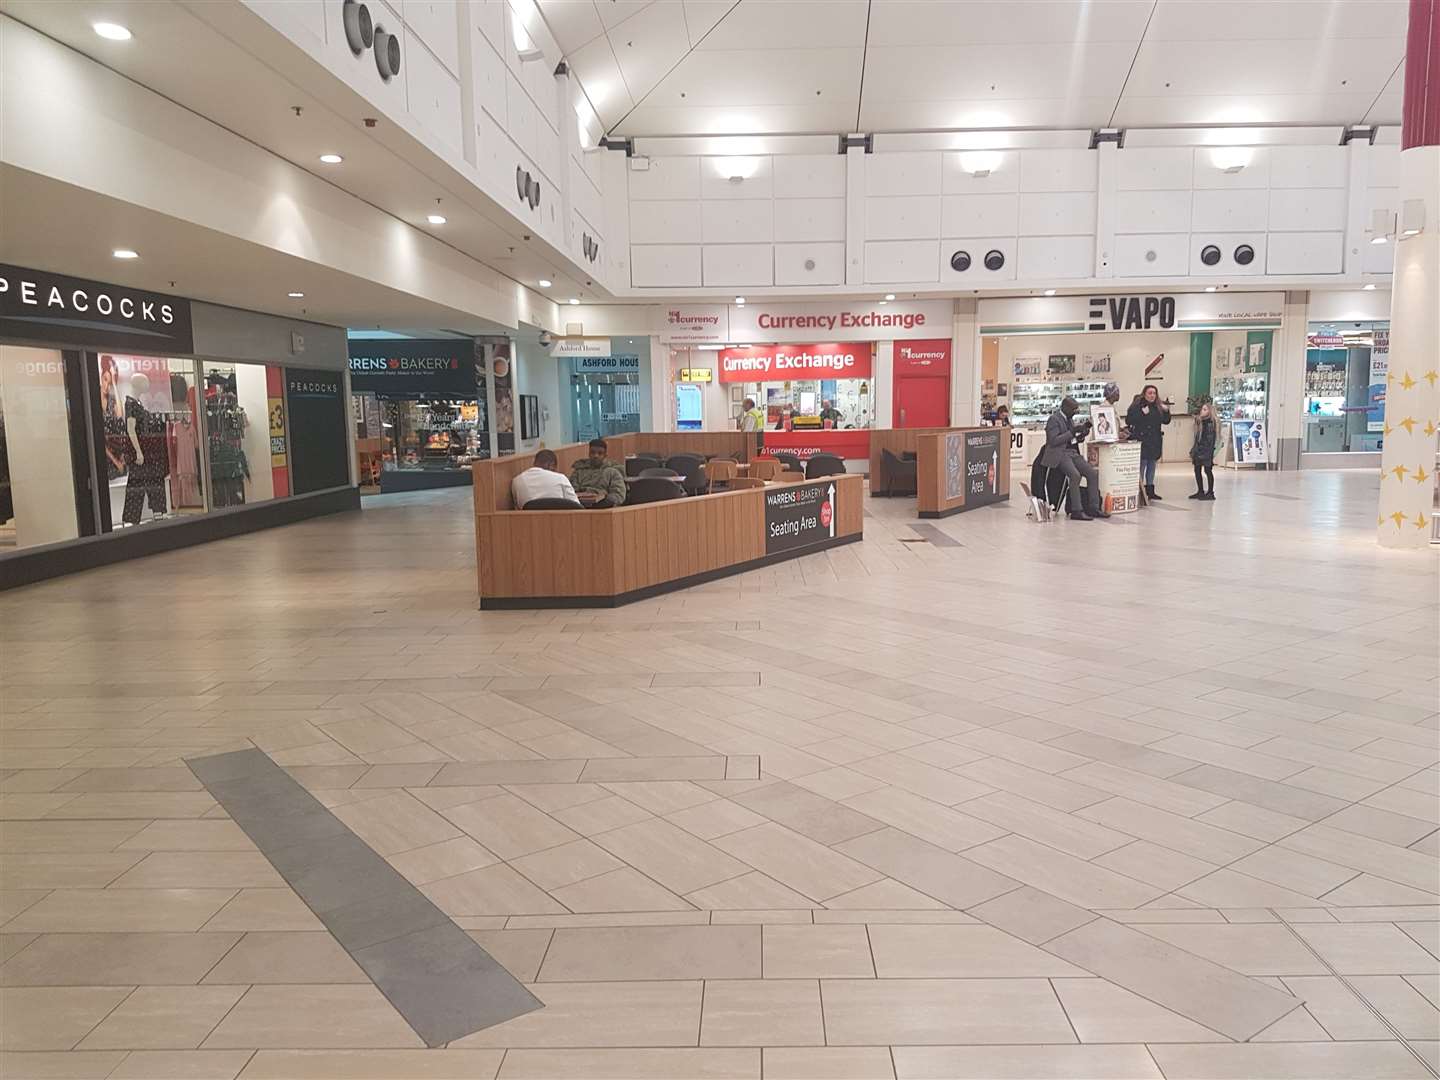 The gang was spotted in this area of the County Square Shopping Centre